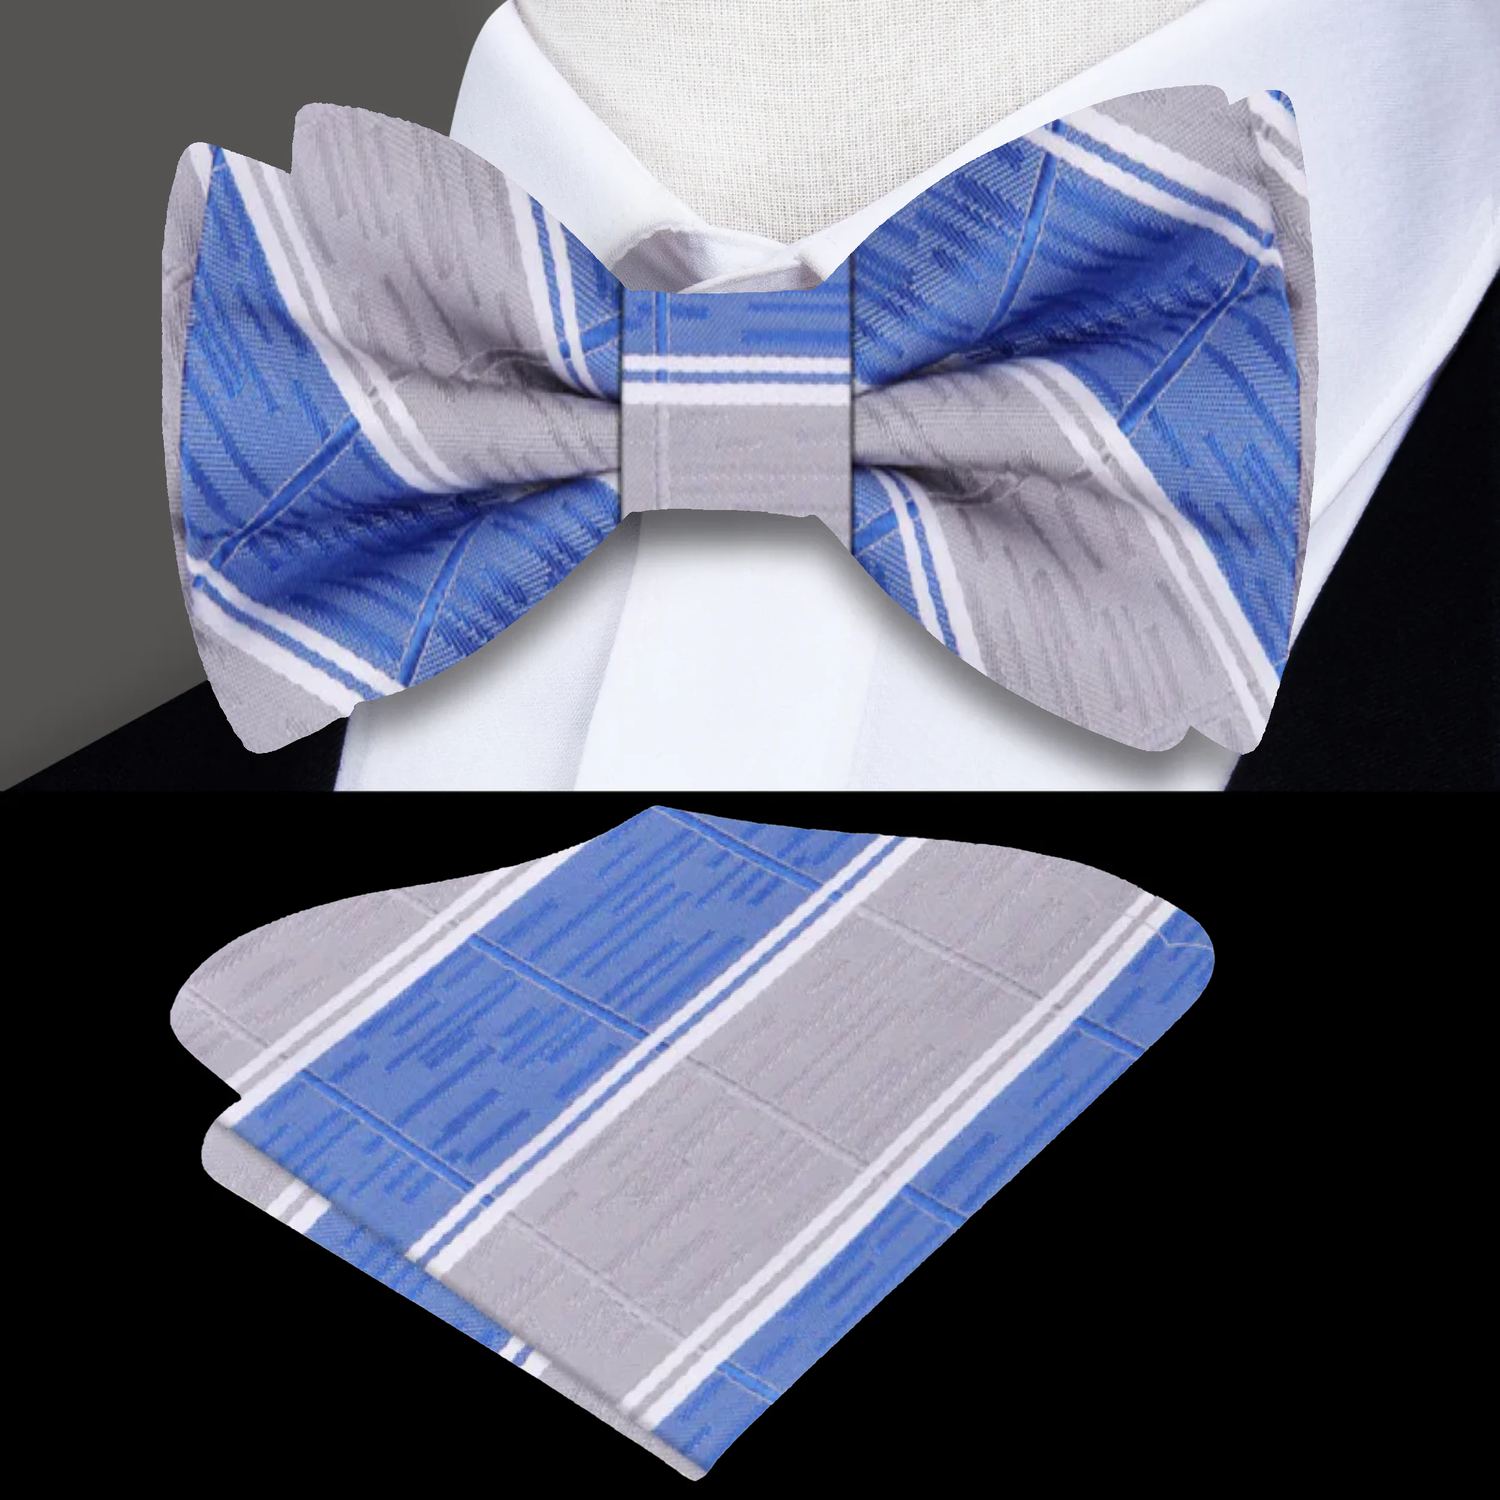 Blue, Grey, White Stripe Bow Tie And Pocket Square||Blue, Grey